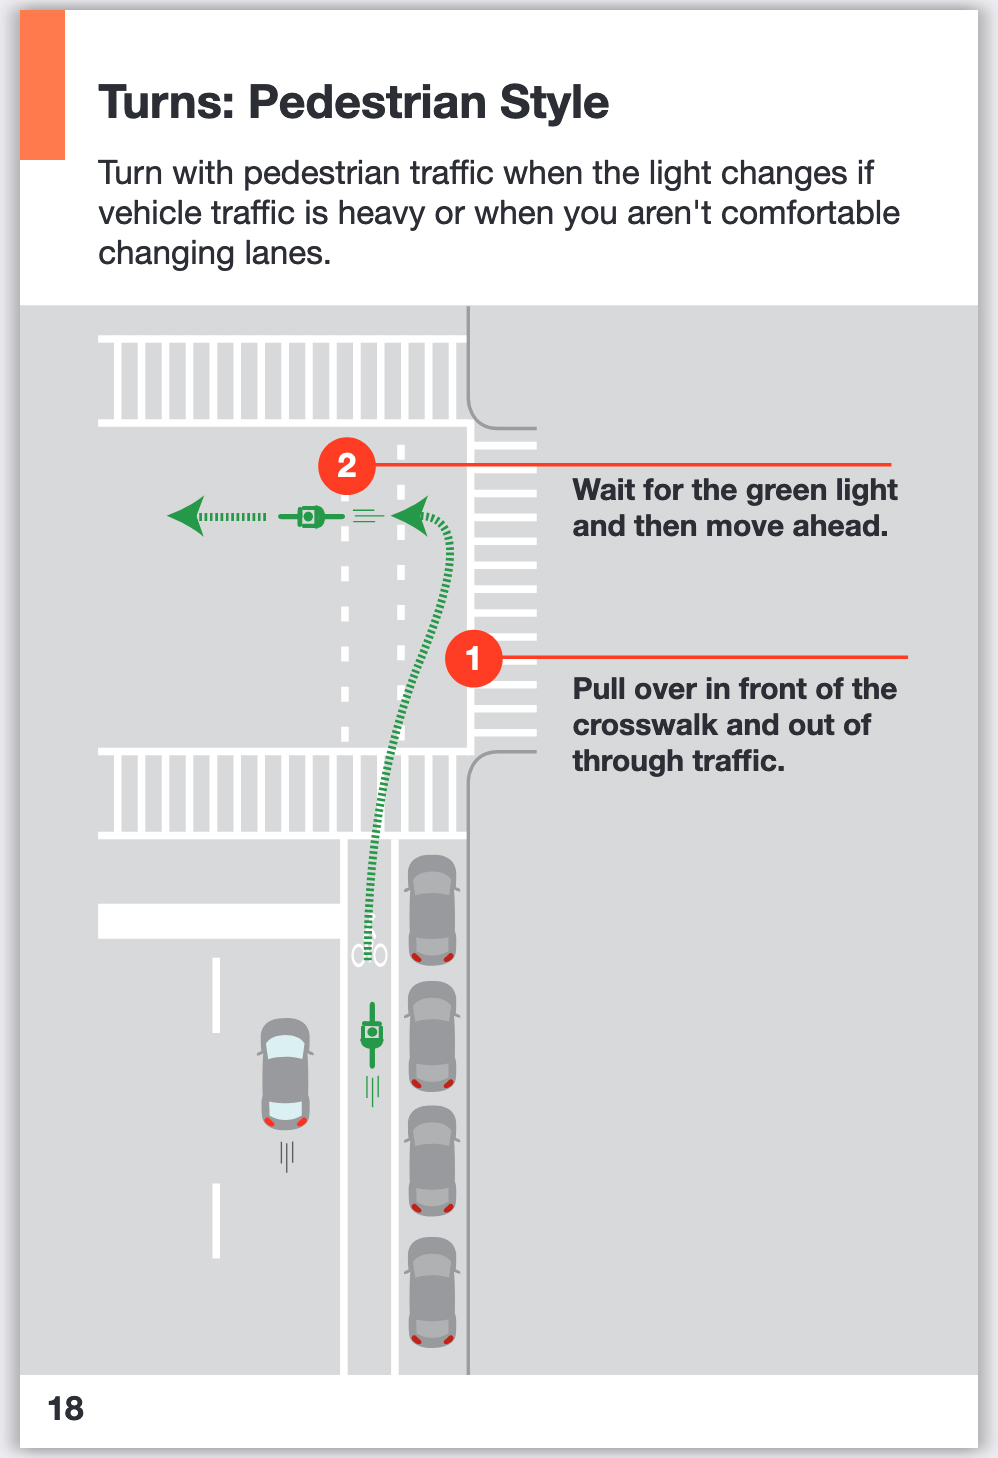 Turn with pedestrian traffic when the light changes if vehicle traffic is heavy or when you aren't comfortable changing lanes. 1. Pull over in front of the crosswalk and out of through traffic. 2. Wait for the green light and then move ahead.